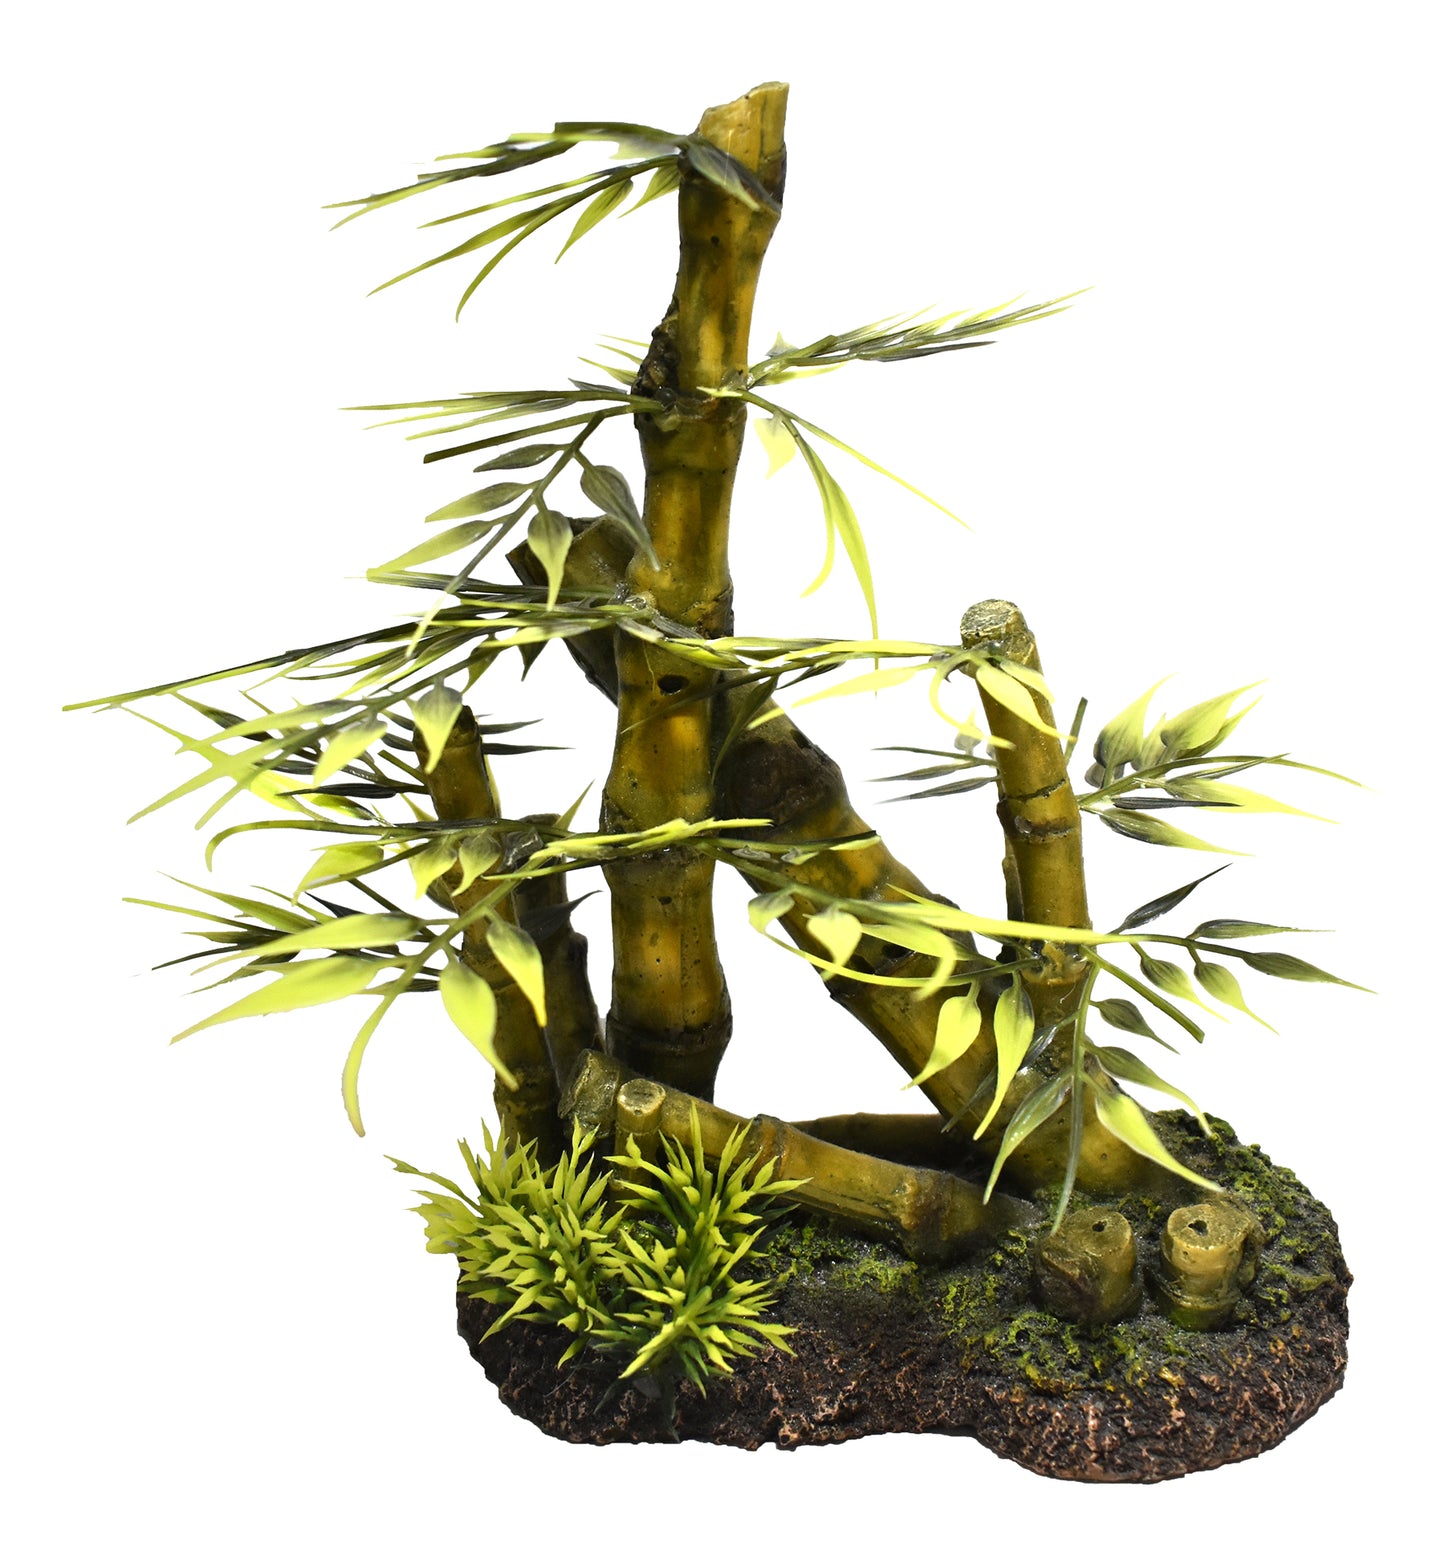 8.9" Bamboo W/Plants Resin Ornament - Map Price $21.79